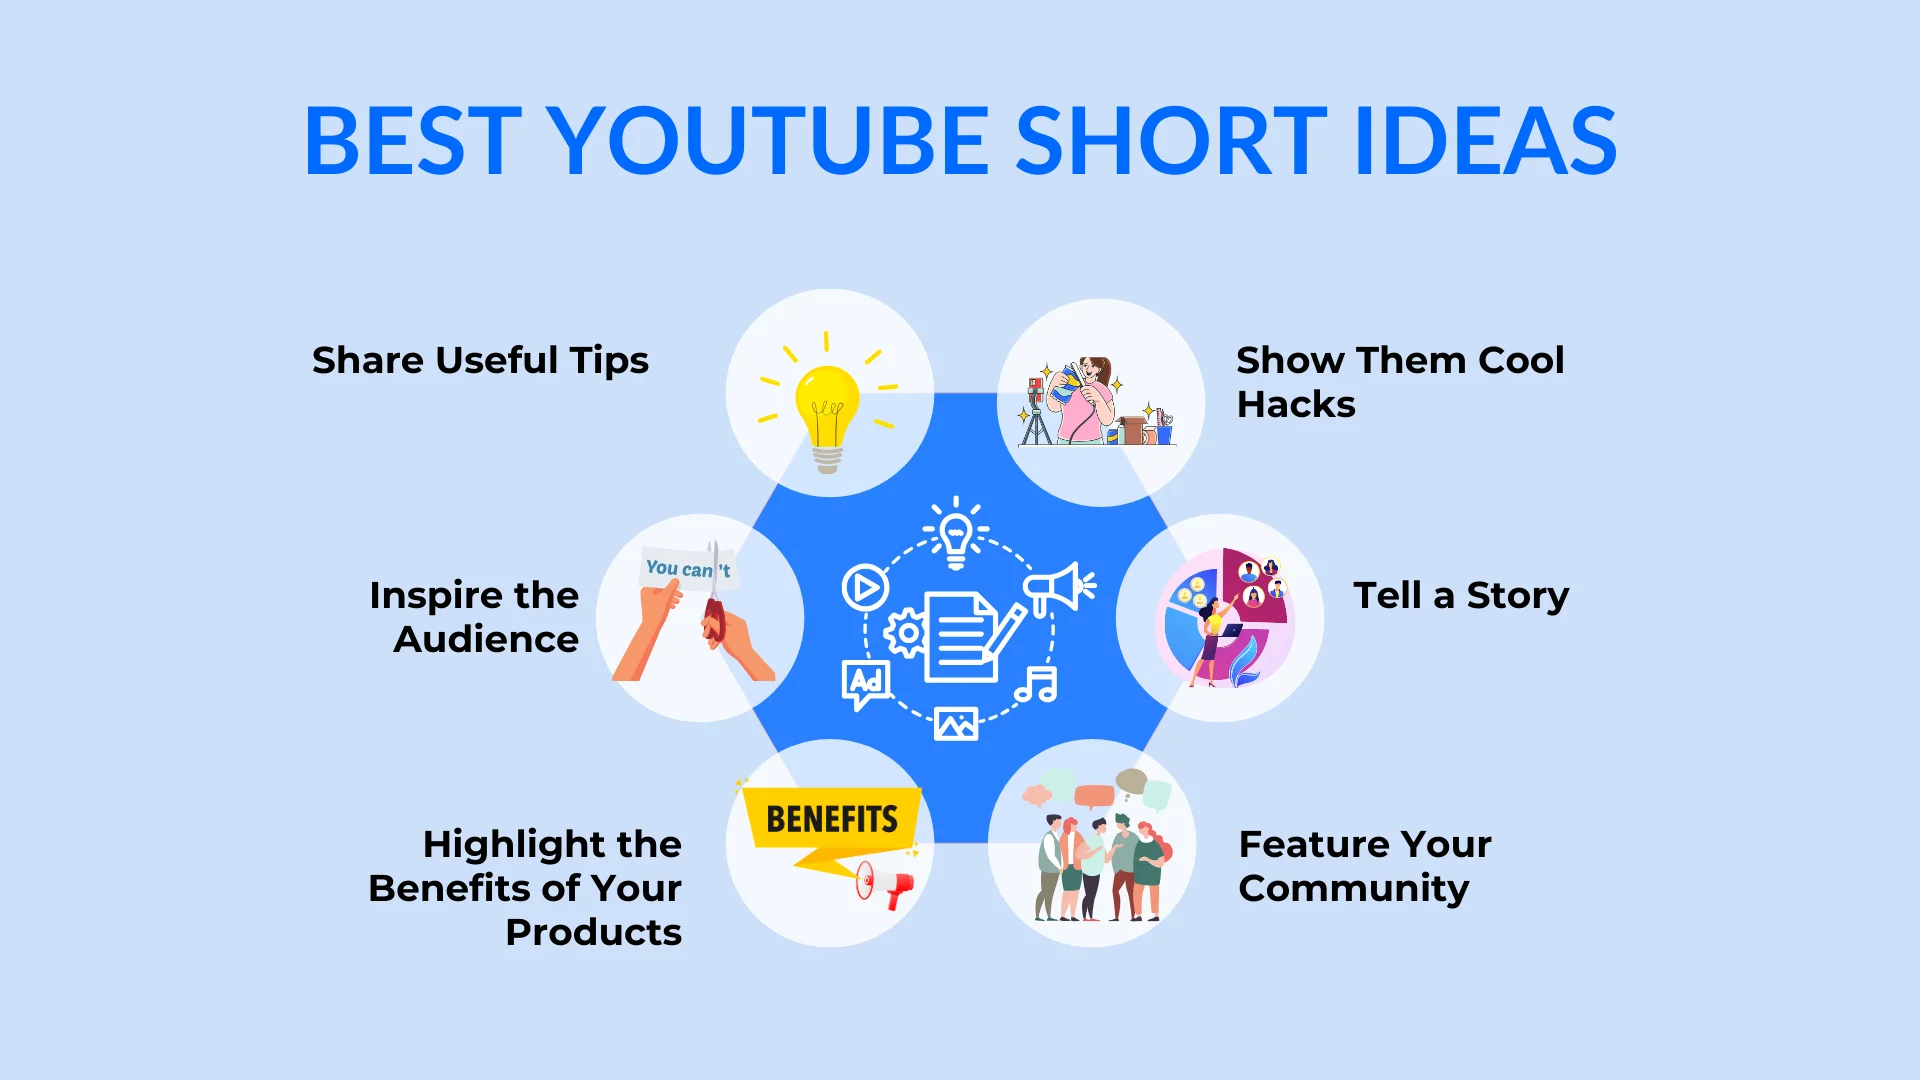 An infographic on the best youtube short ideas